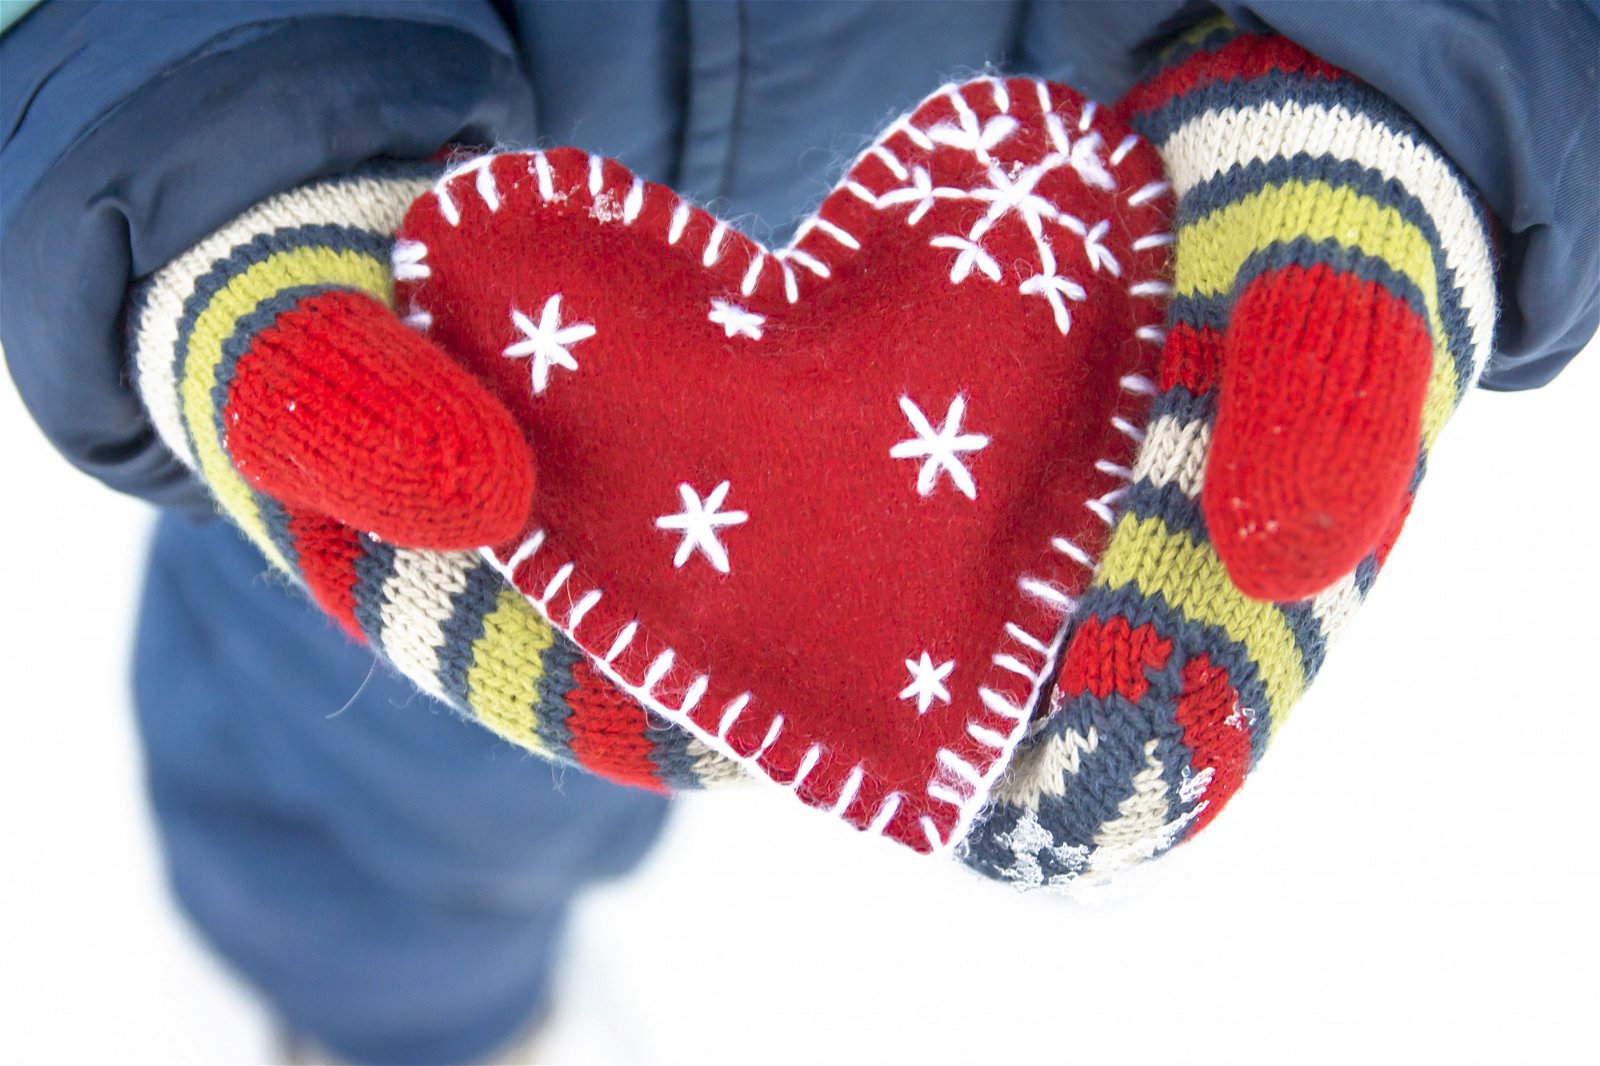 A child's mittened hands are holding a red felt heart embroidered with snow flakes.